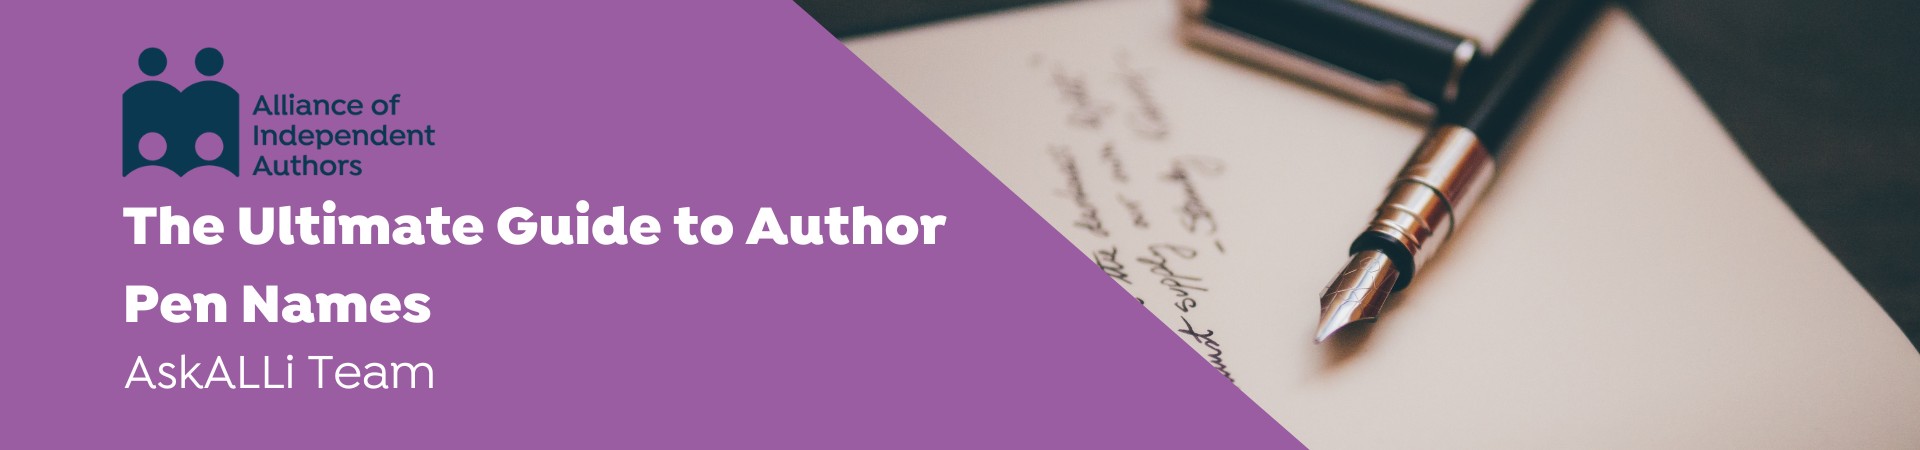 The Ultimate Guide To Author Pen Names